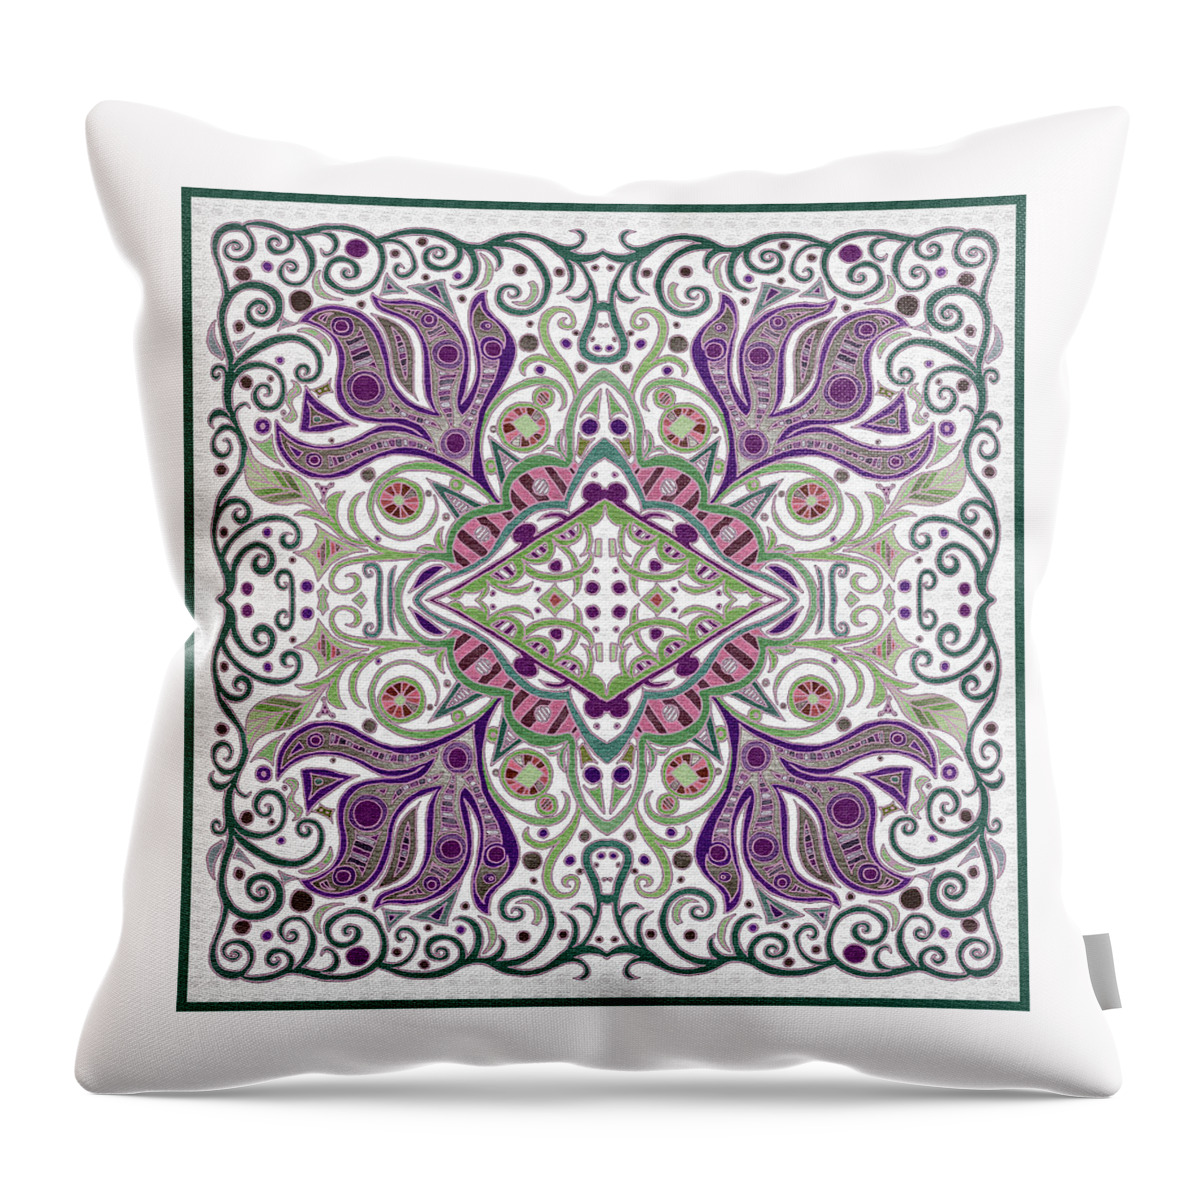 Diamond Throw Pillow featuring the tapestry - textile Abstract Textured Home Decor Design in White, Green, Purple, and Salmon color by Lise Winne